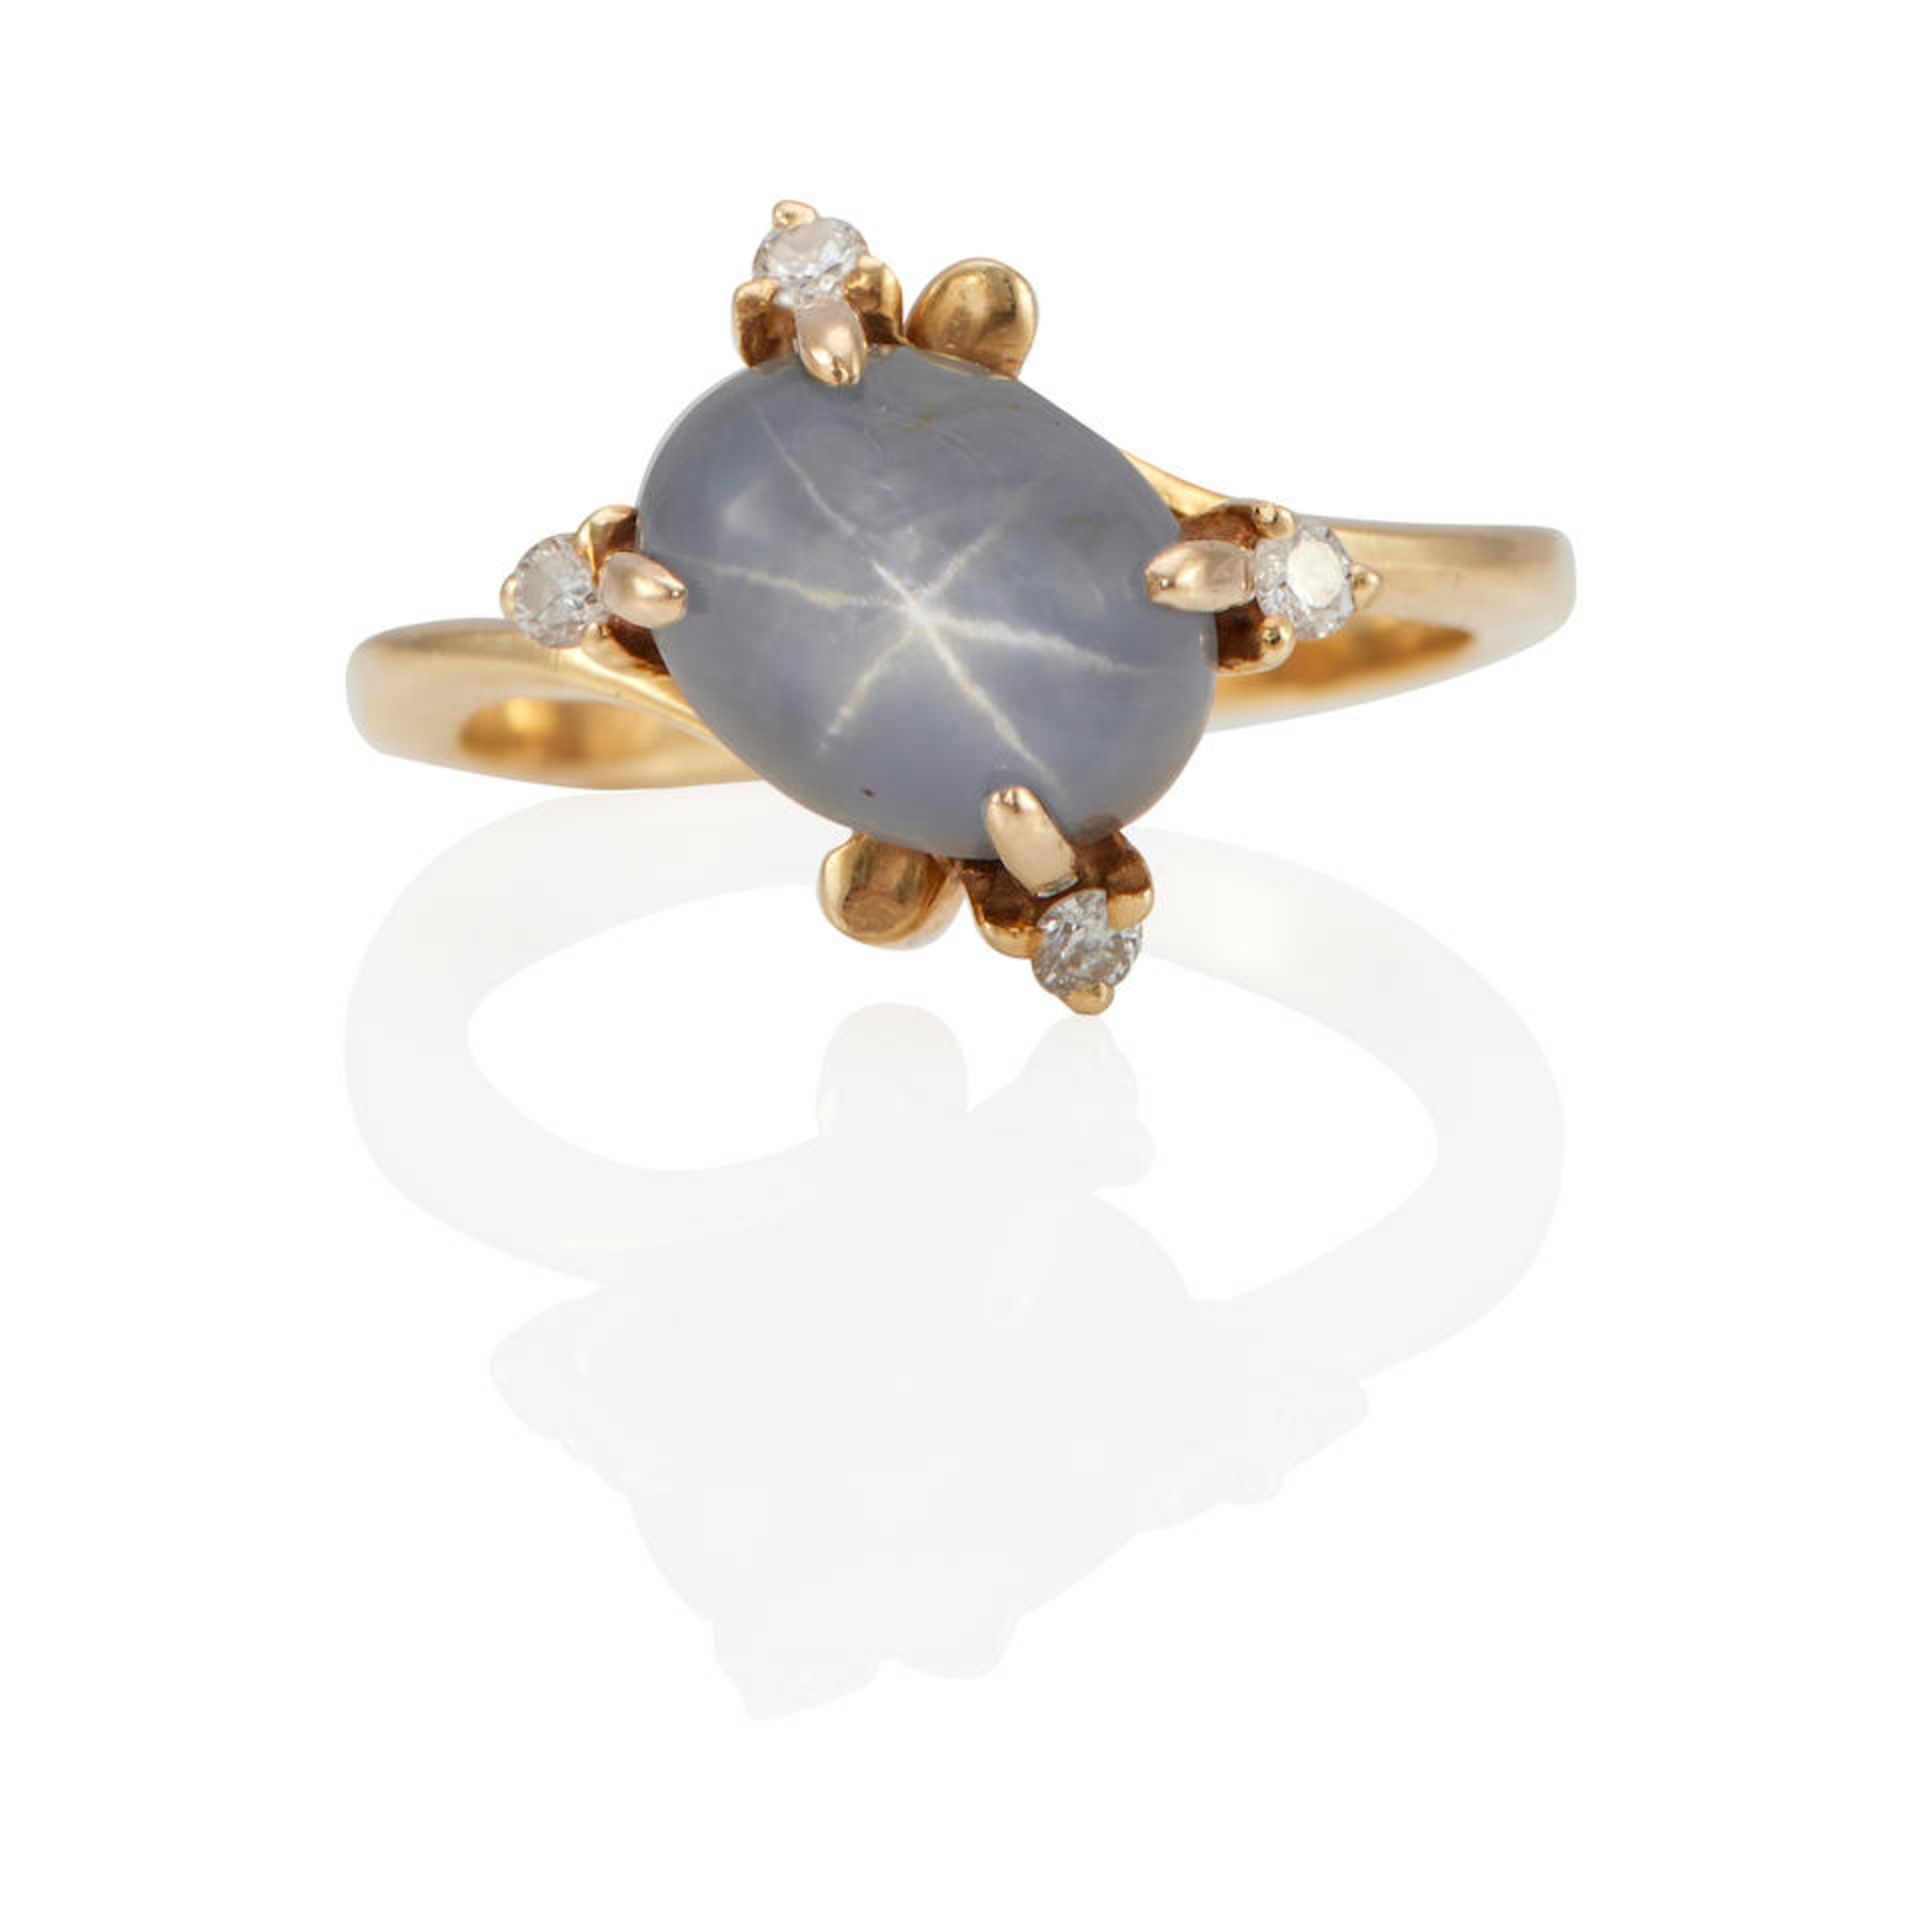 A 14K GOLD, STAR SAPPHIRE AND DIAMOND RING